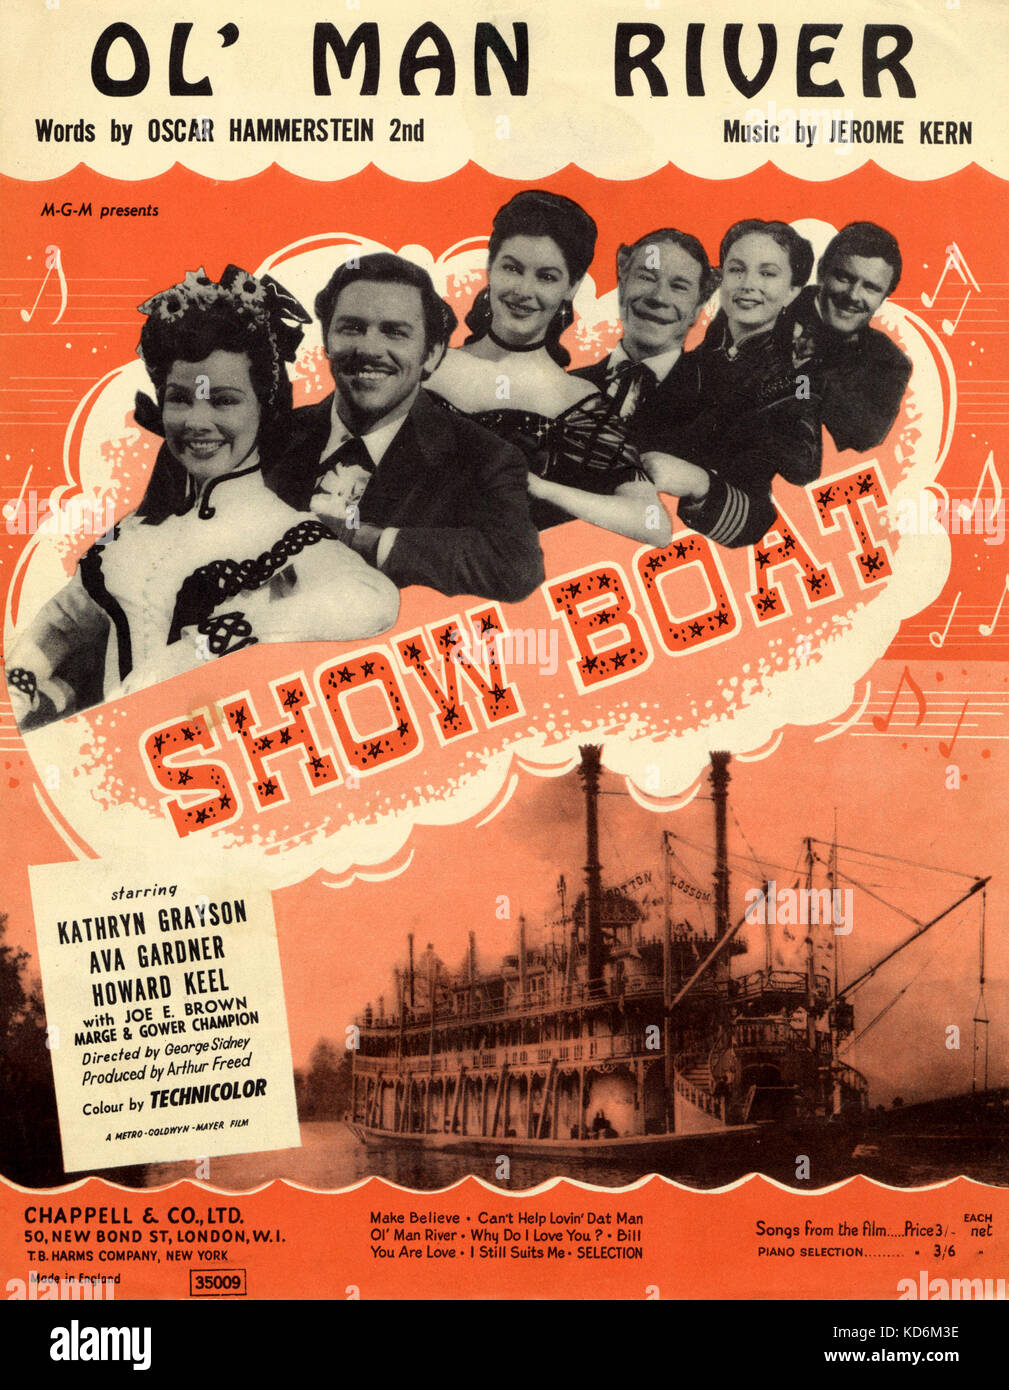 Jerome Kern 's musical ' Show Boat ' - score cover for  song  Ol' Man River from 1951 film version of the 1927 musical, with Kathryn Grayson, Ava Gardner and Howard Keel, directed by George Sydney (MGM). Words by Oscar Hammerstein II (American librettist, 1895-1960).  Music by J. Kern. Arrangement for piano. Published Chappell & Co., London & Sydney. Copyright 1928 T.B. Harms Company Stock Photo